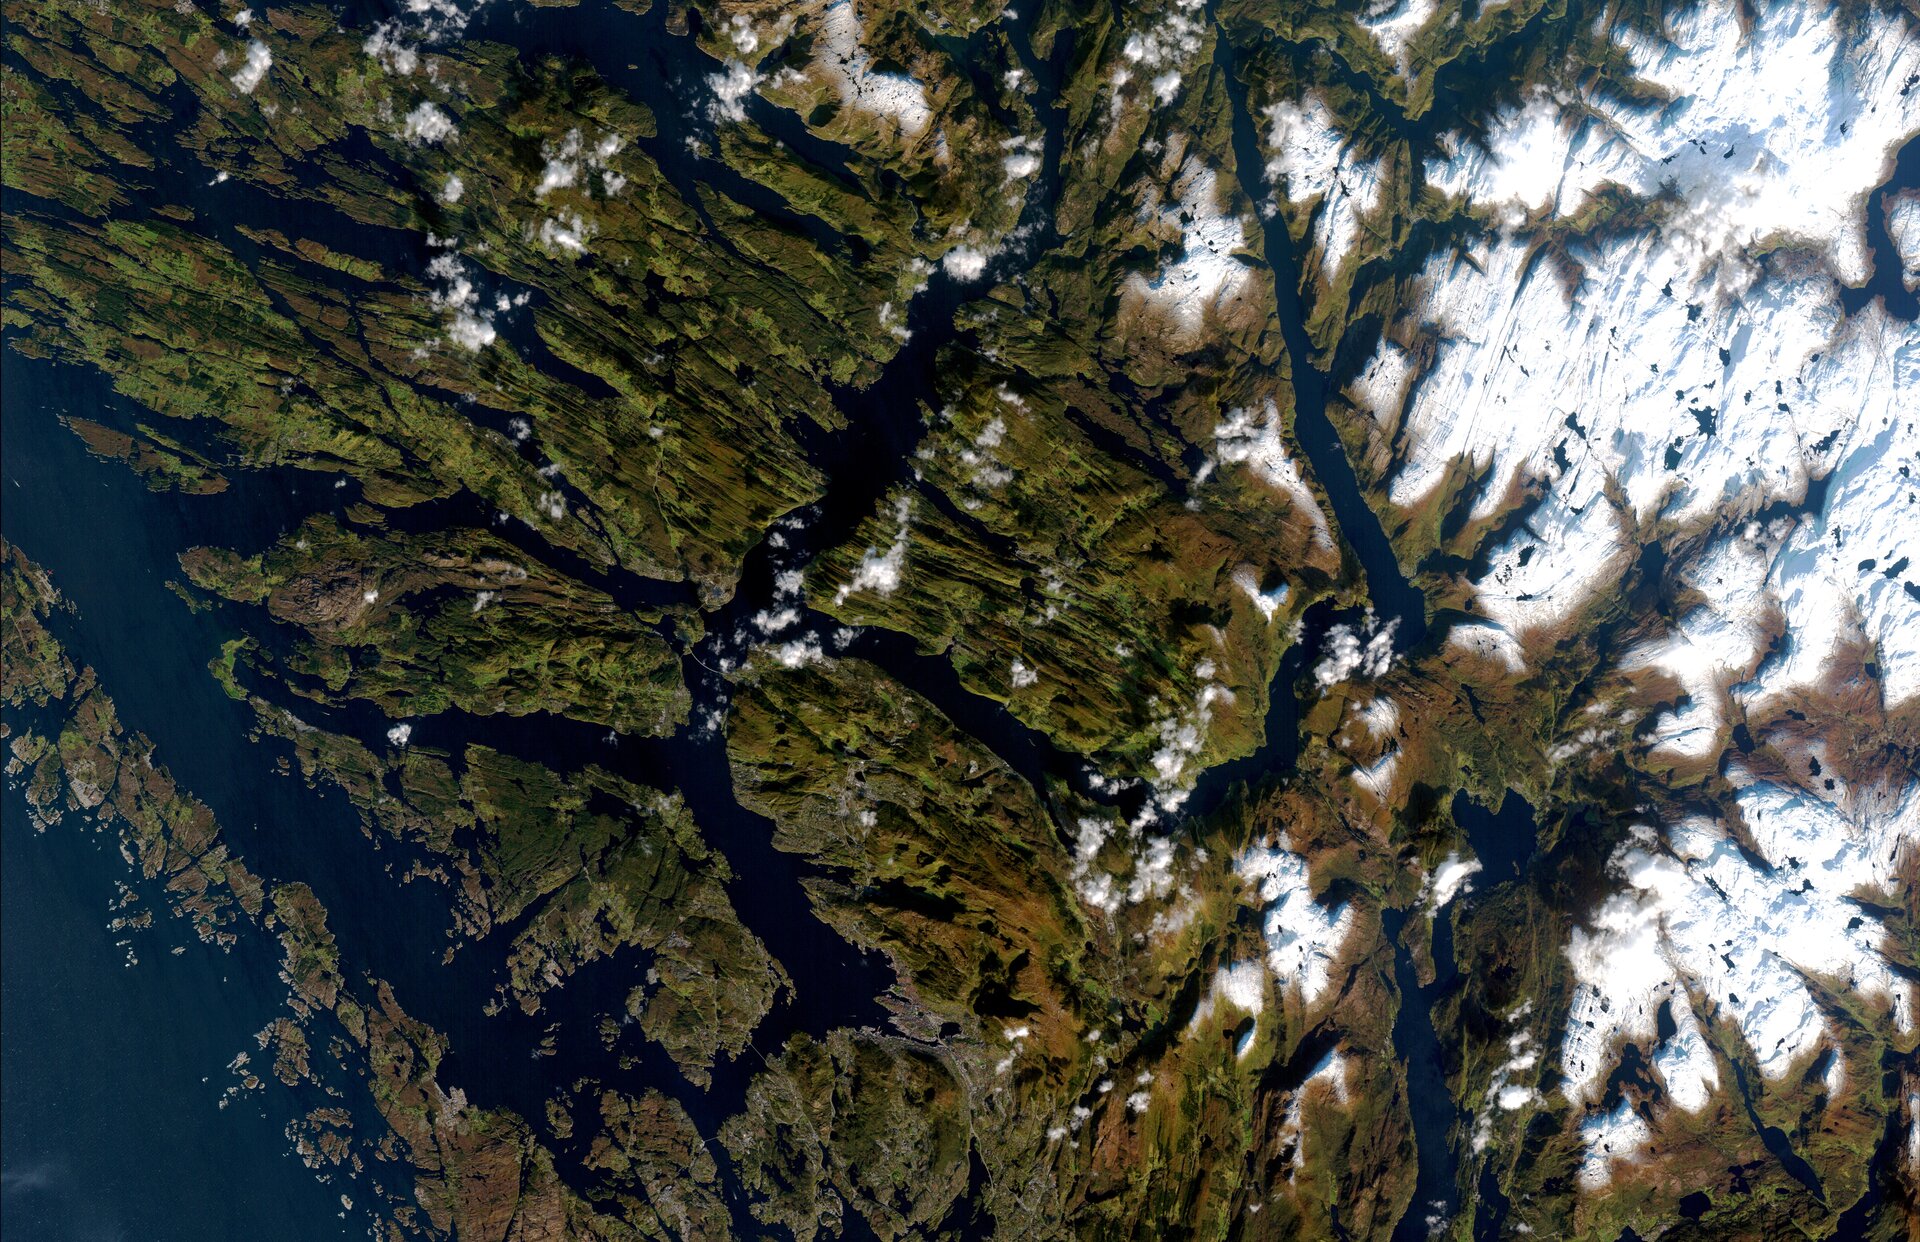 Fjords and islands in Norway